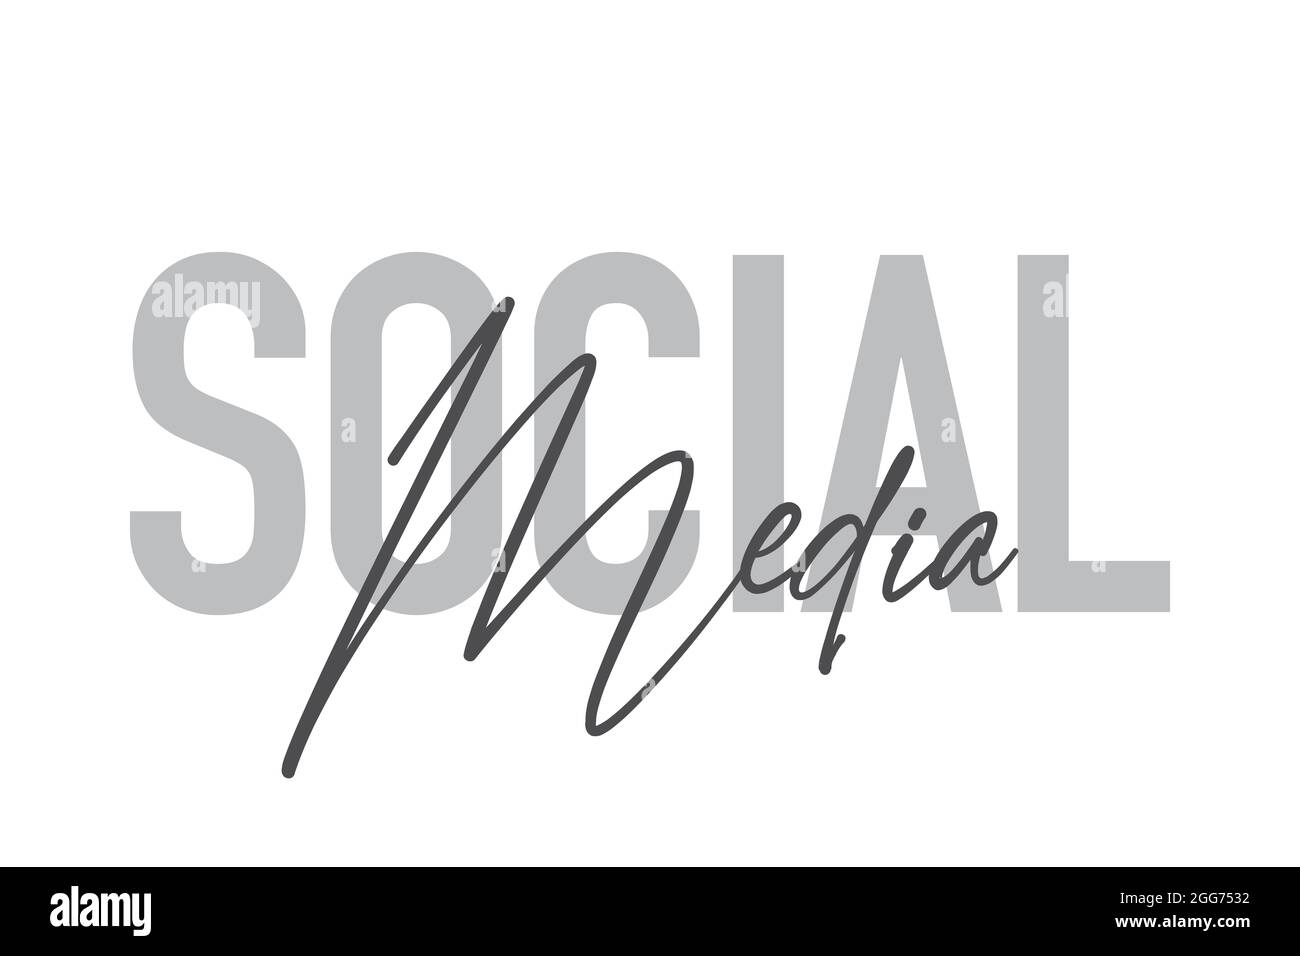 Modern, simple, minimal typographic design of a saying 'Social Media' in tones of grey color. Cool, urban, trendy and playful graphic vector art with Stock Photo